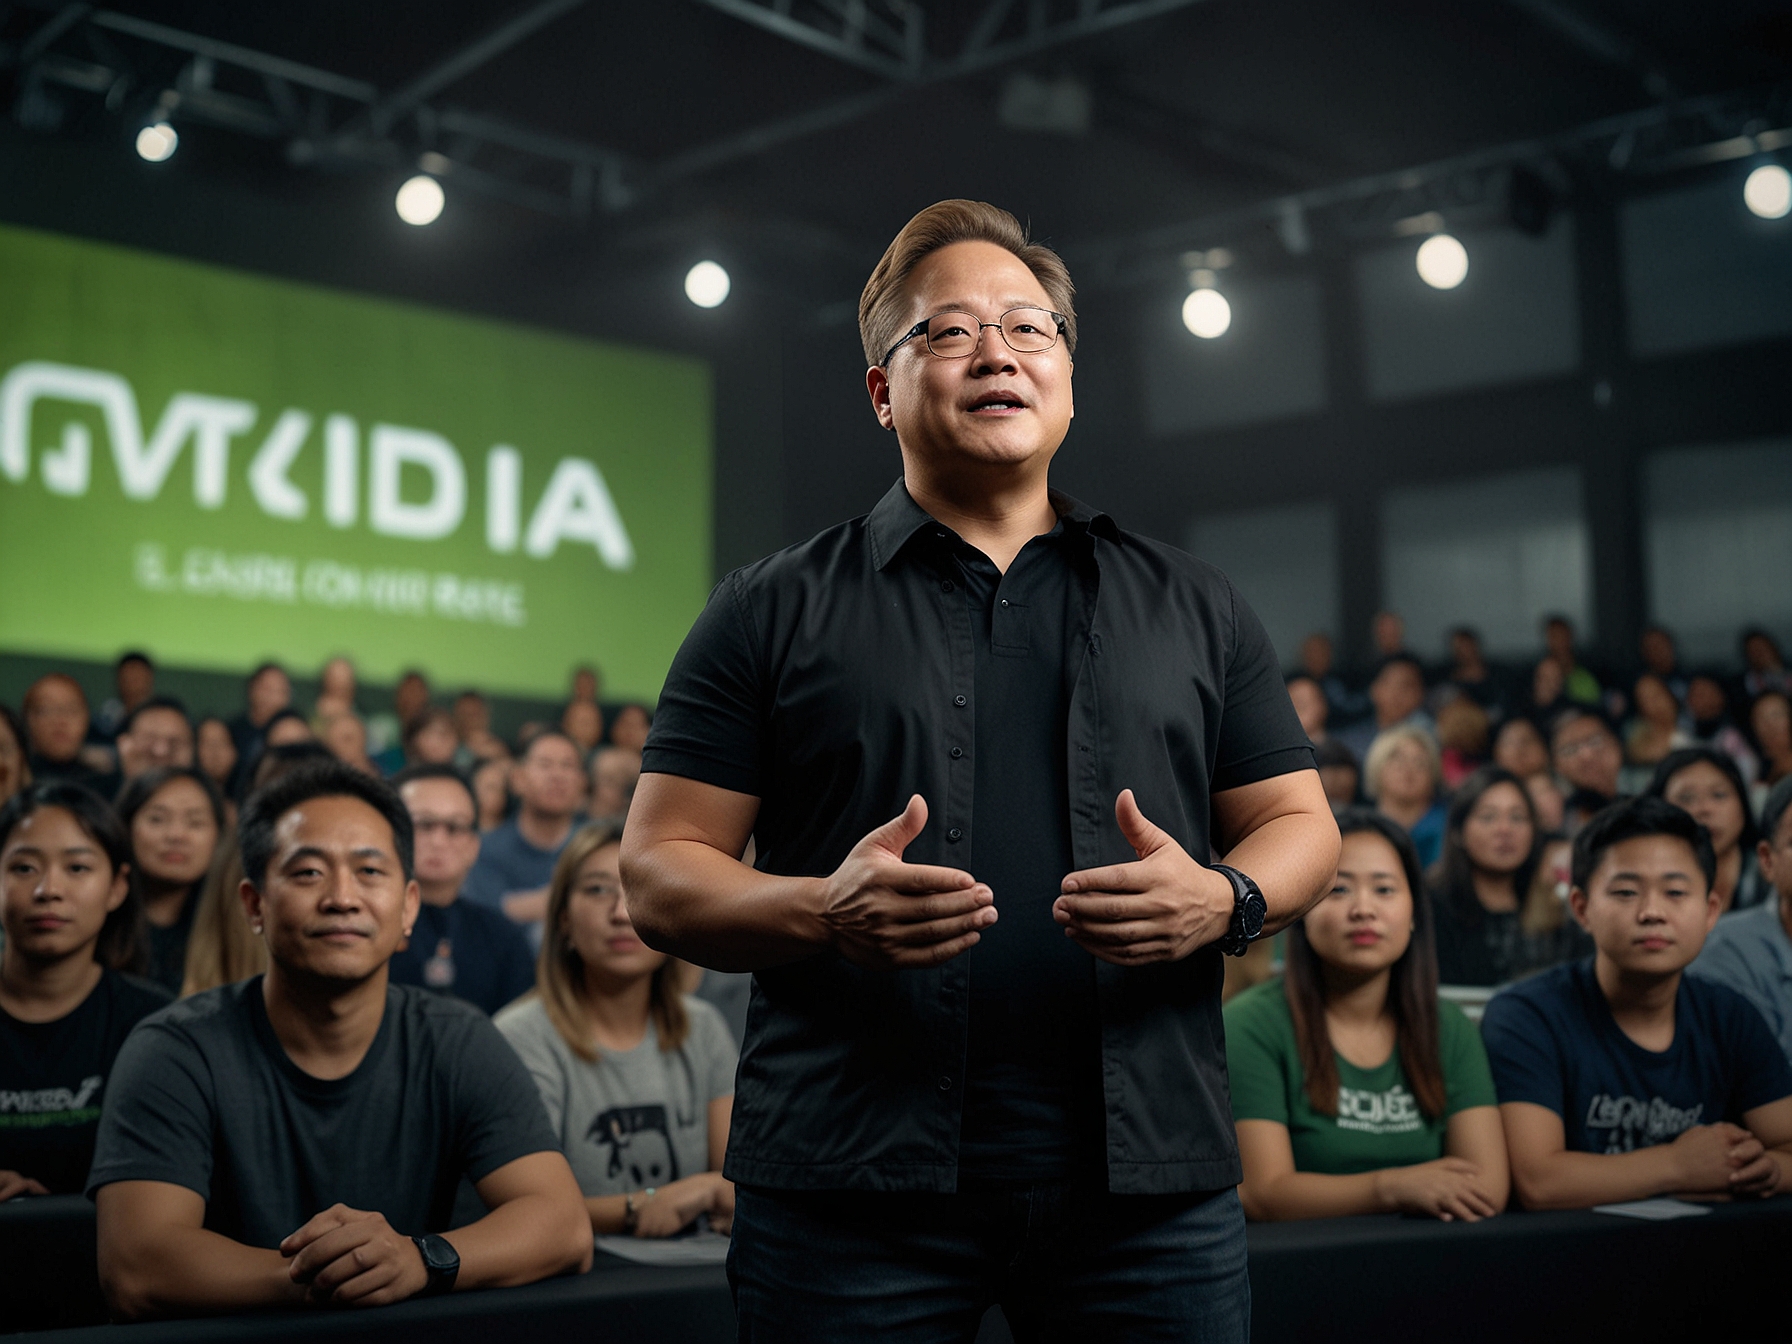 Jensen Huang, CEO of Nvidia, is seen addressing a crowd, emphasizing his visionary leadership and the company's forefront position in the AI revolution.